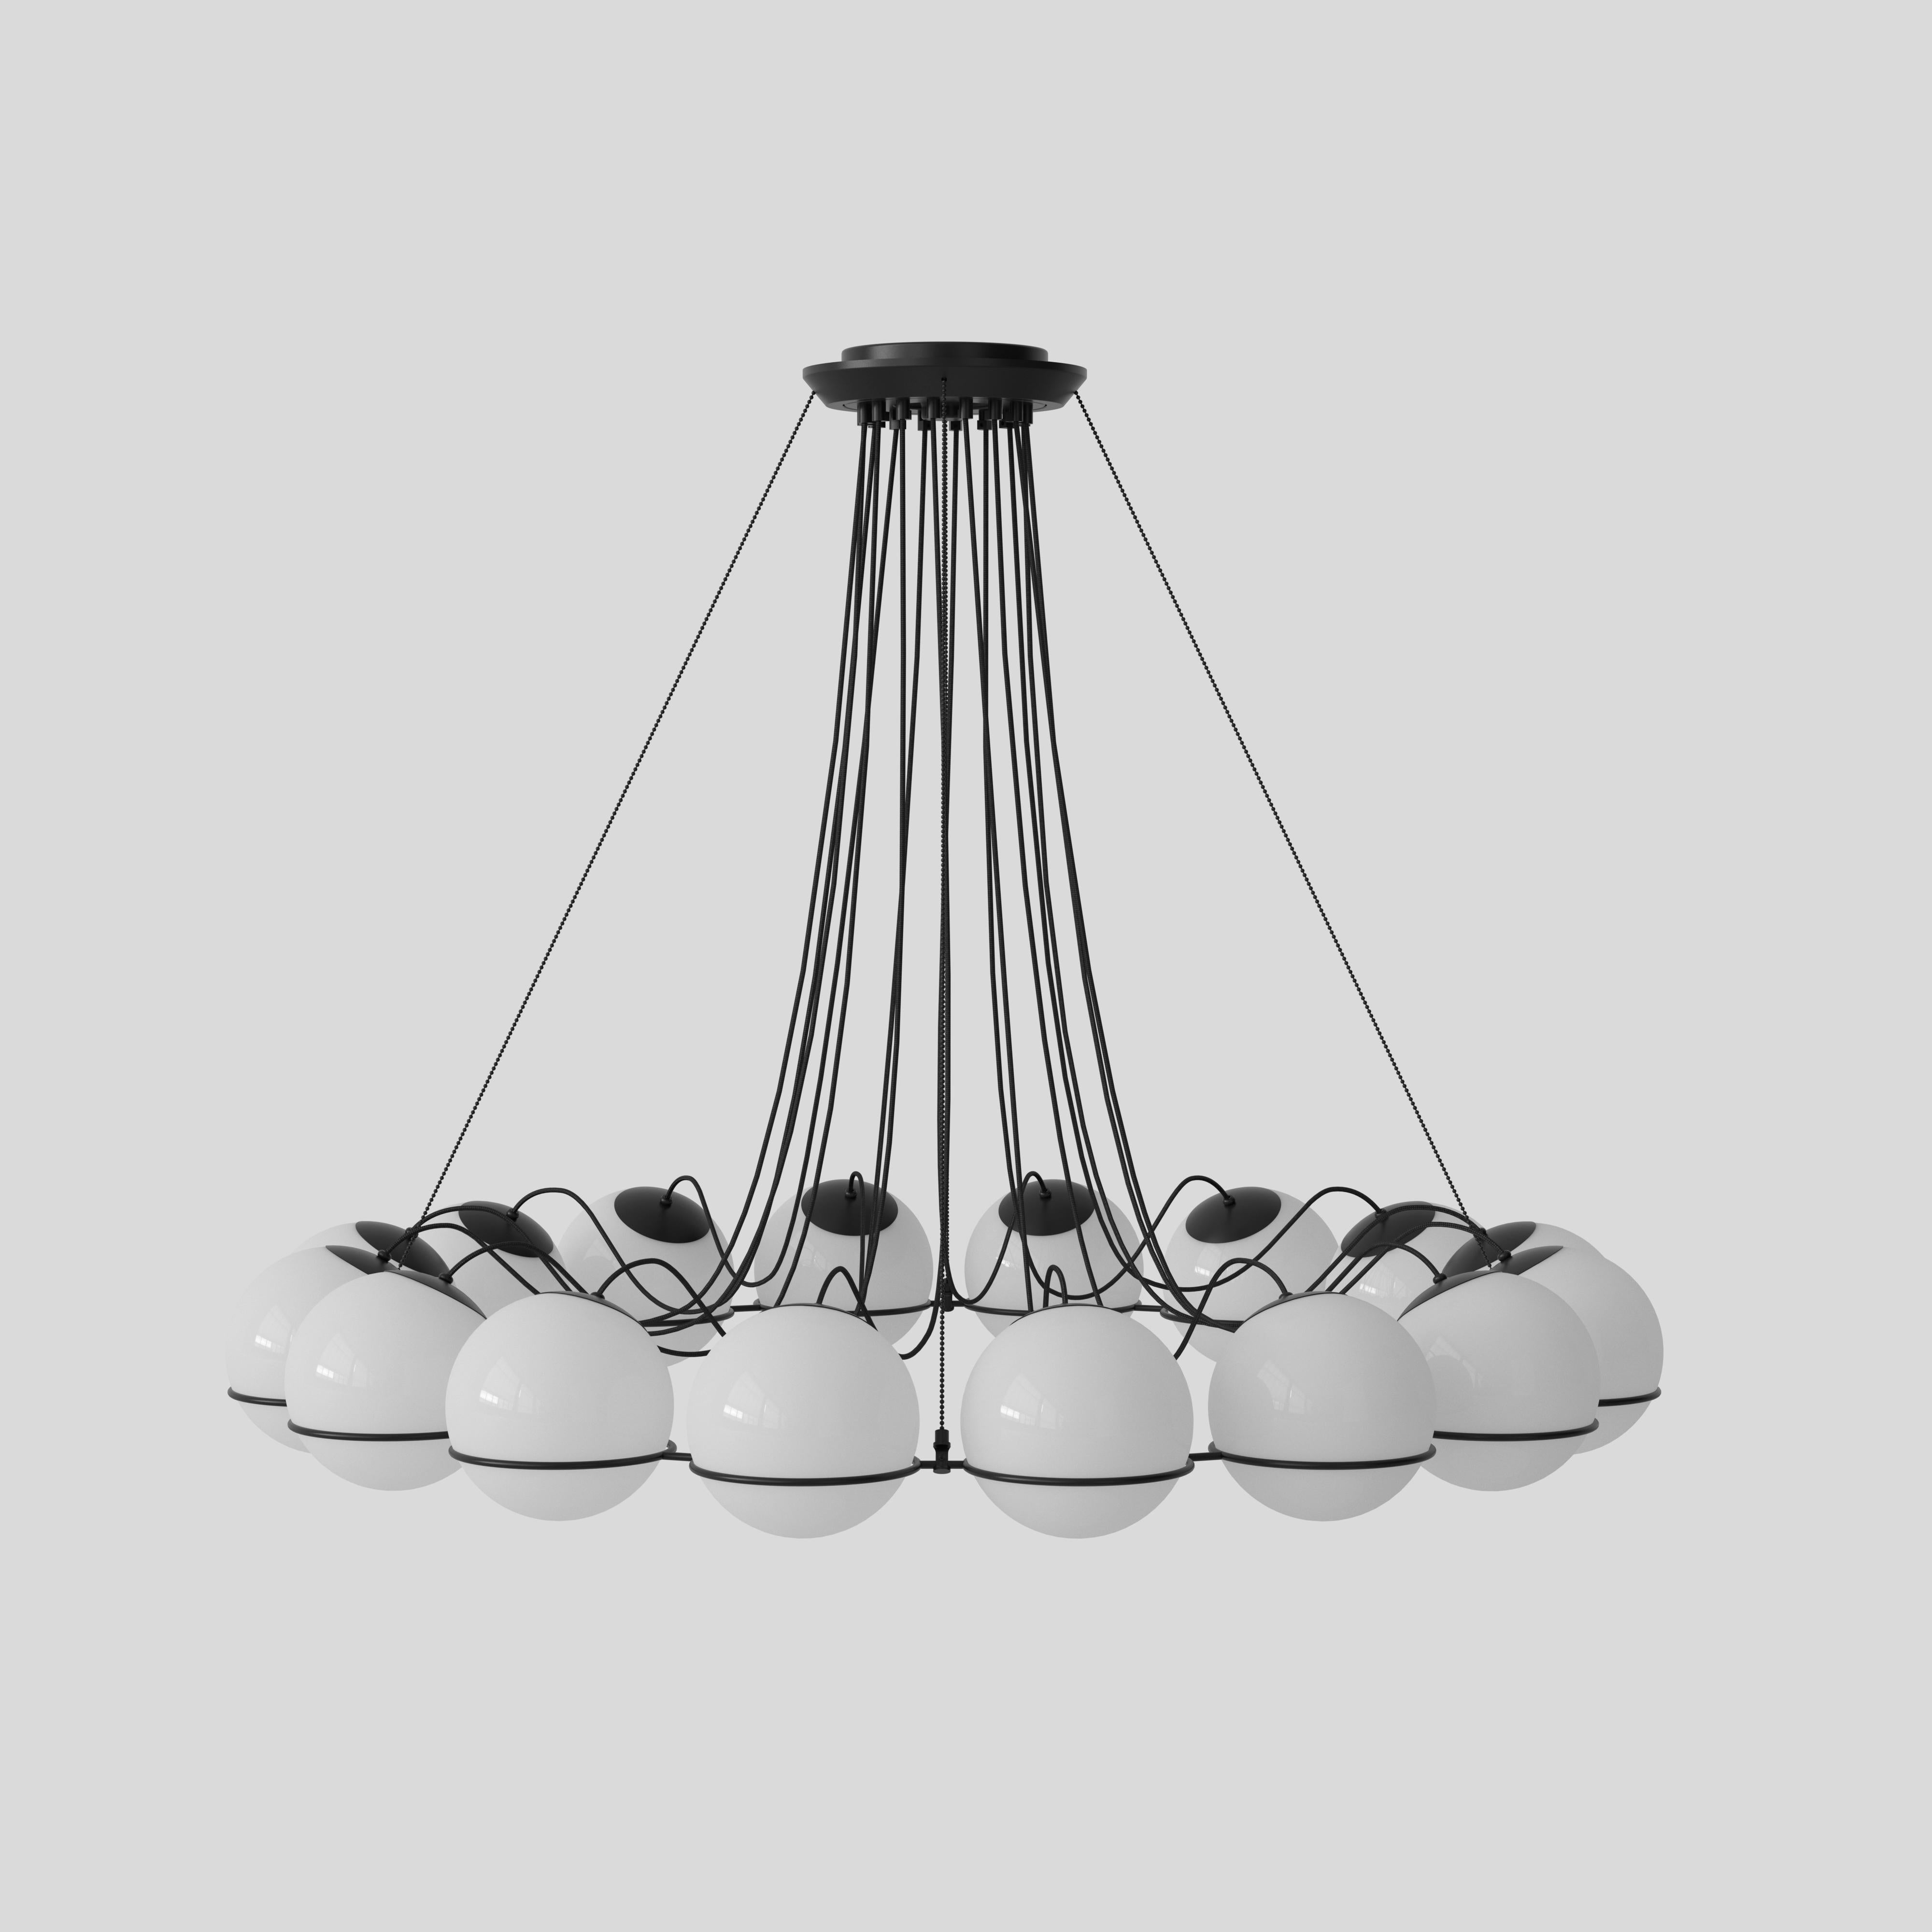 Model 2109
Design by Gino Sarfatti
The Le Sfere Chandelier is composed of a circular array of blown opaline glass spheres. Each sphere is held in place by a large Black or Champagne painted aluminium ring-structure. Each ring has a small cut,